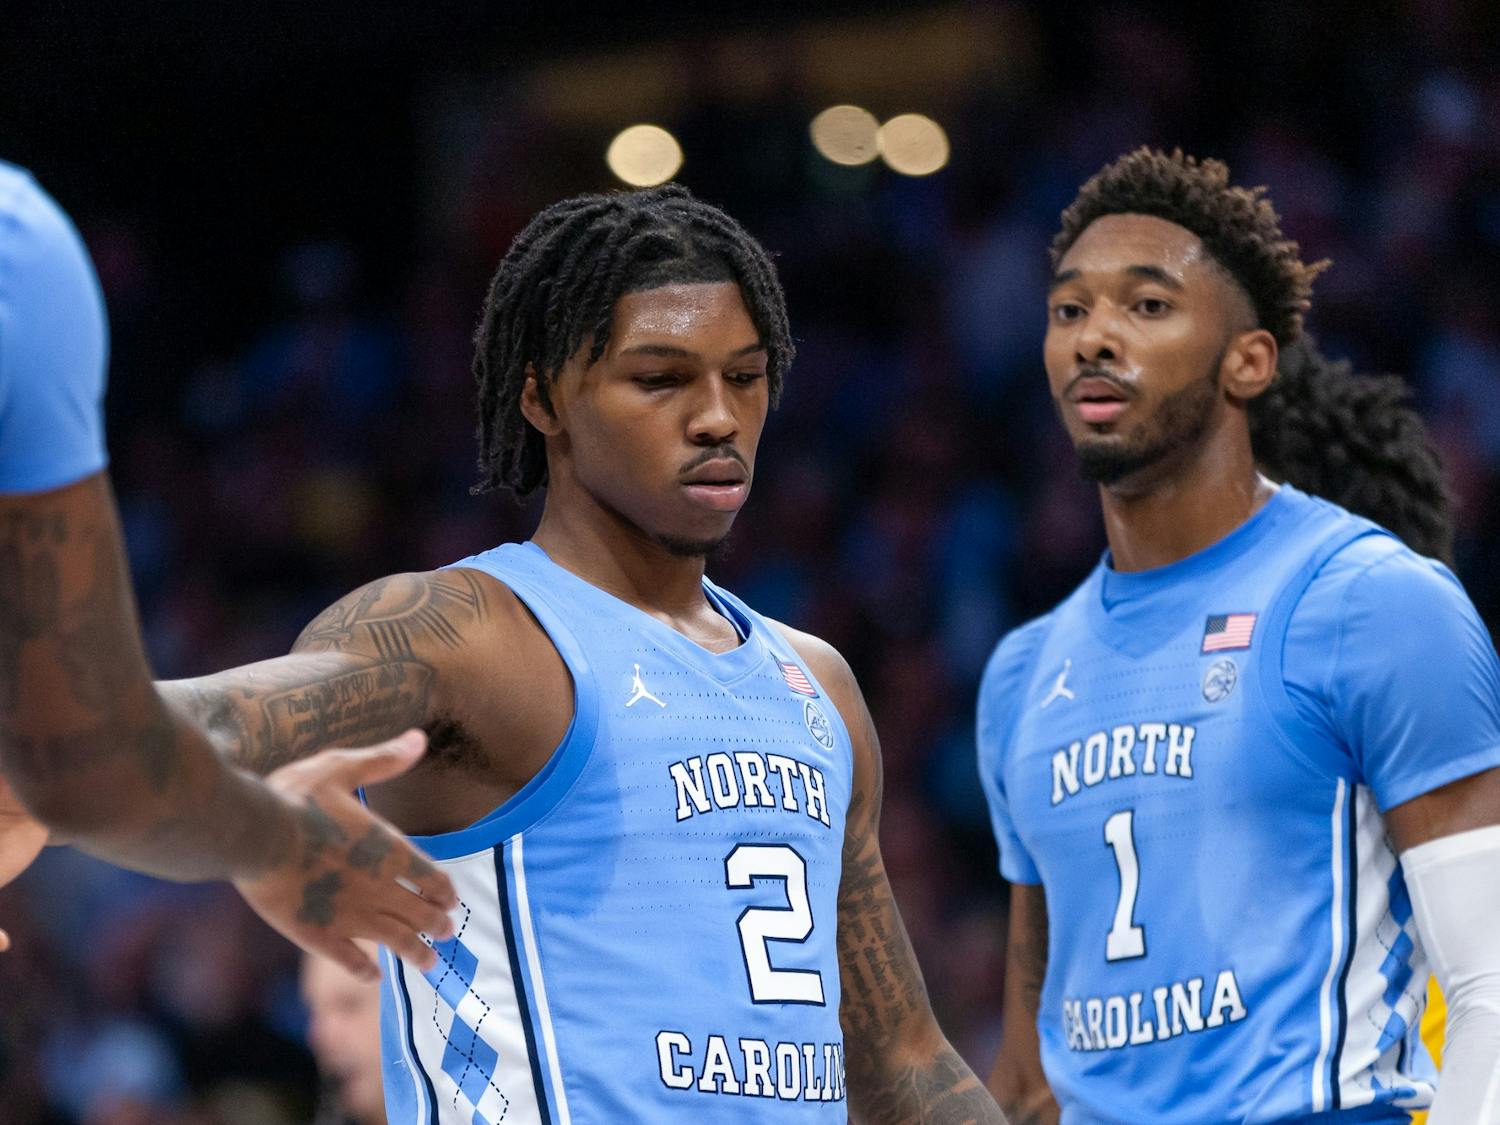 UNC junior guard Caleb Love (2) gives a high-five to senior forward/center Armando Bacot (5) during the men's basketball game against Michigan at the Jumpman Invitational in Charlotte, N.C., on Wednesday, Dec. 21, 2022. UNC beat Michigan 80-76.